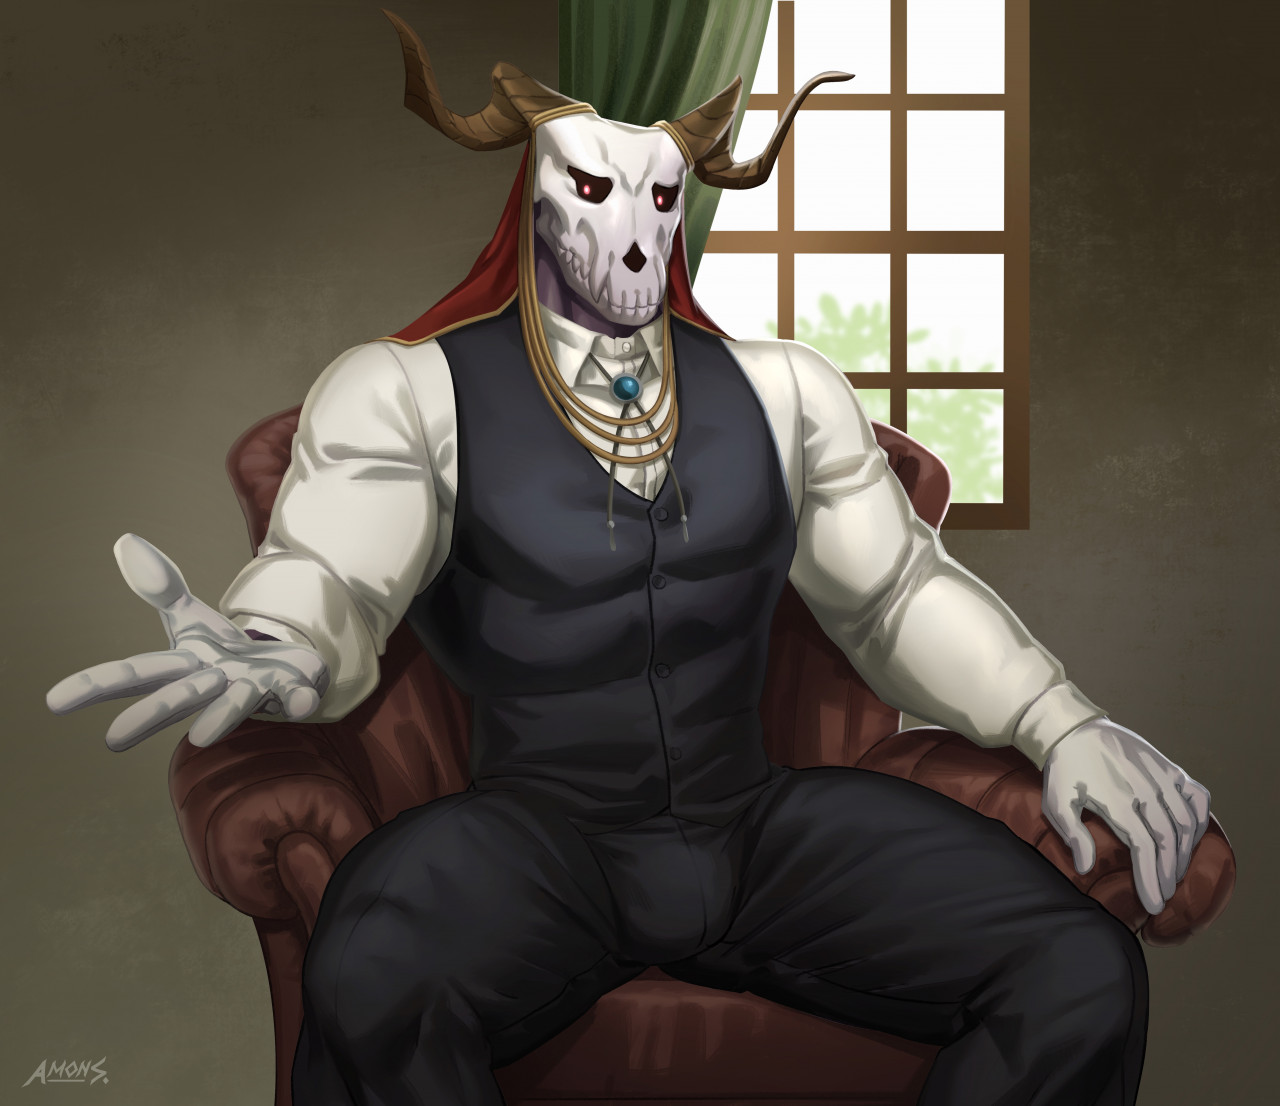 How old is elias ainsworth